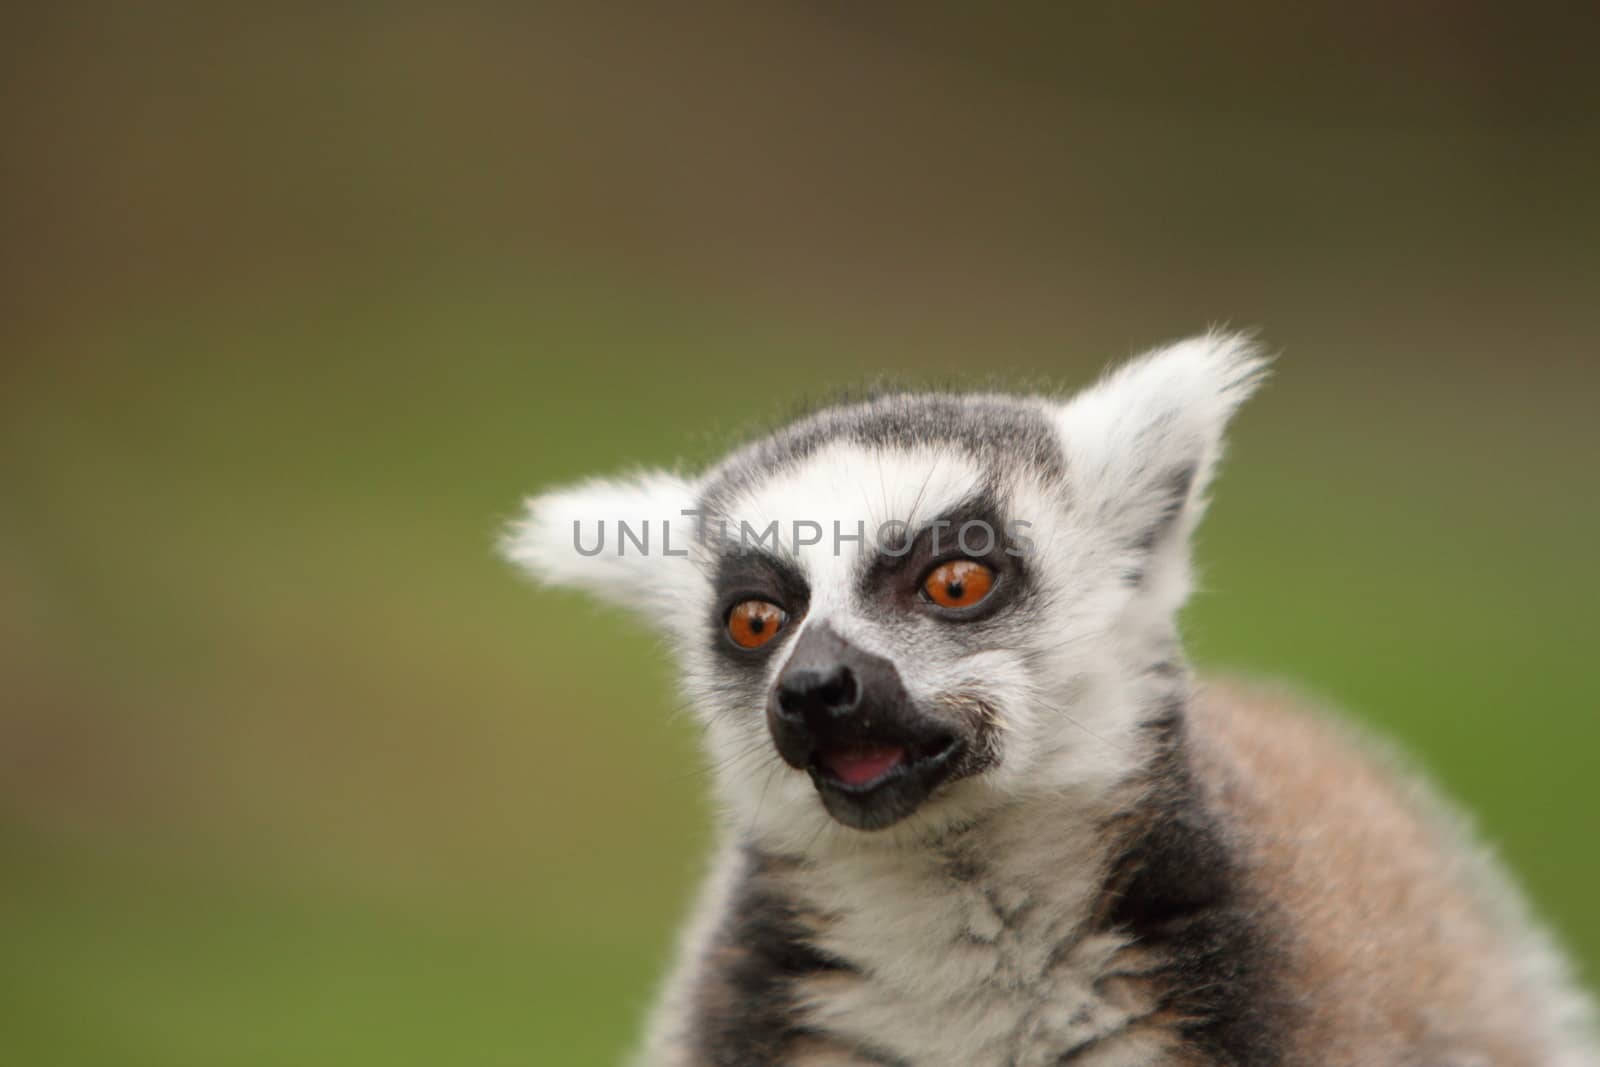 Ring Tailed Lemur by mitzy